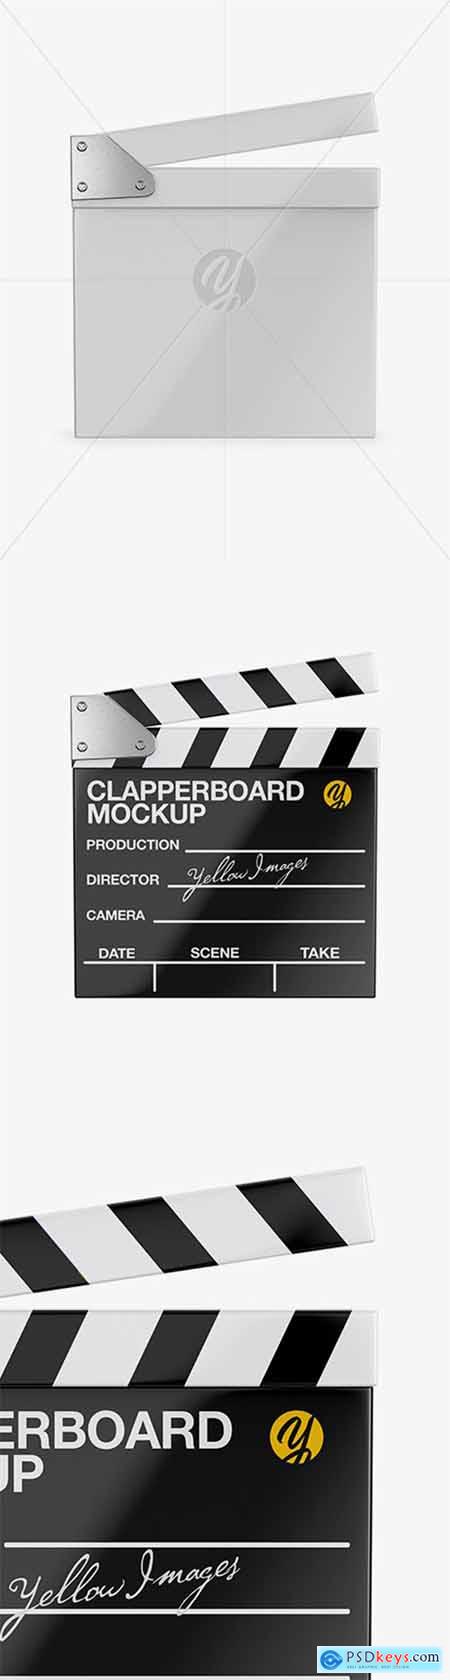 Download Glossy Clapperboard Mockup Front View 26043 Free Download Photoshop Vector Stock Image Via Torrent Zippyshare From Psdkeys Com Yellowimages Mockups